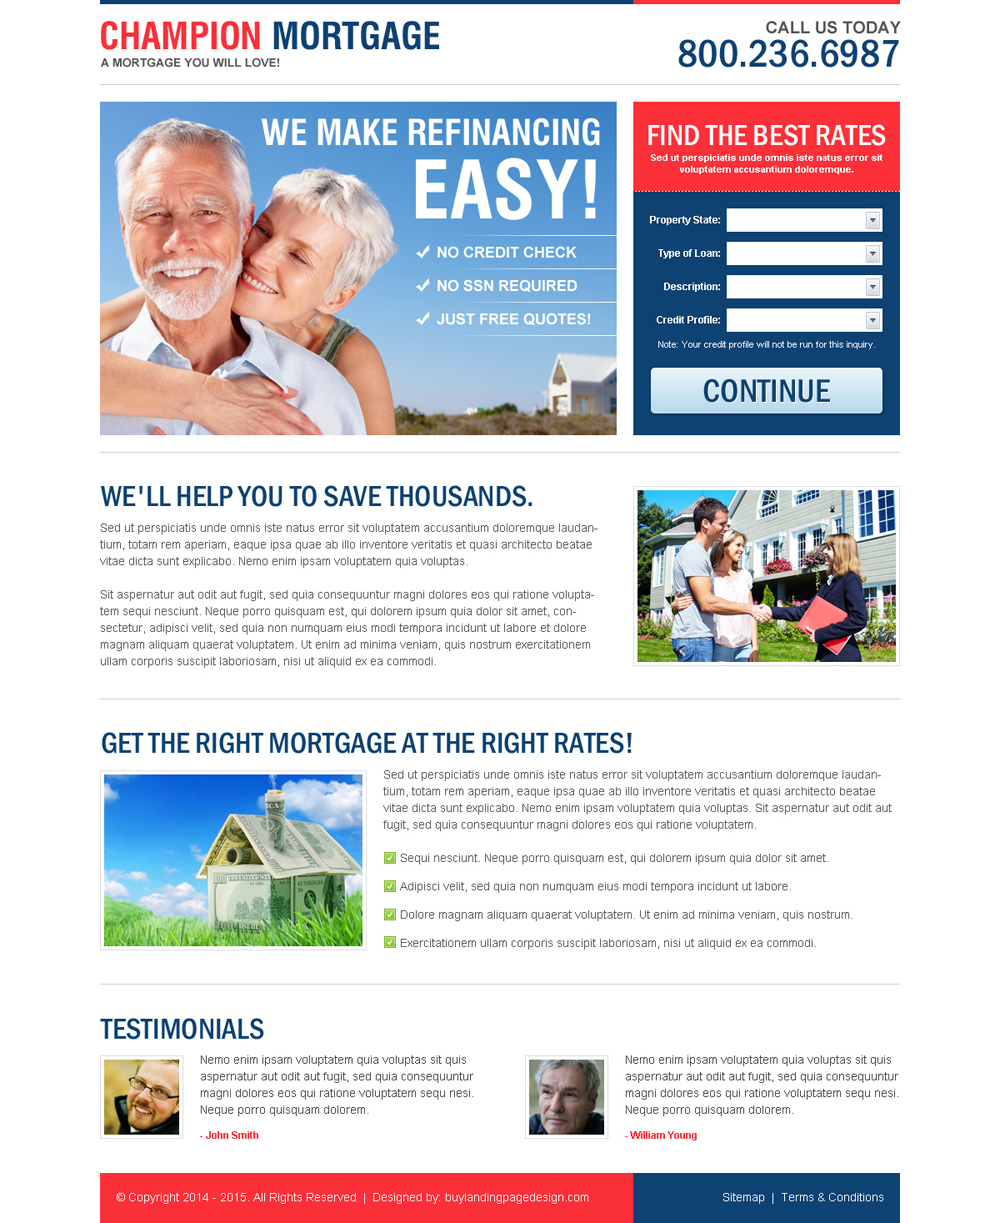 converting-mortgage-business-service-lead-capture-landing-page-design-templates-to-boost-your-mortgage-business-008